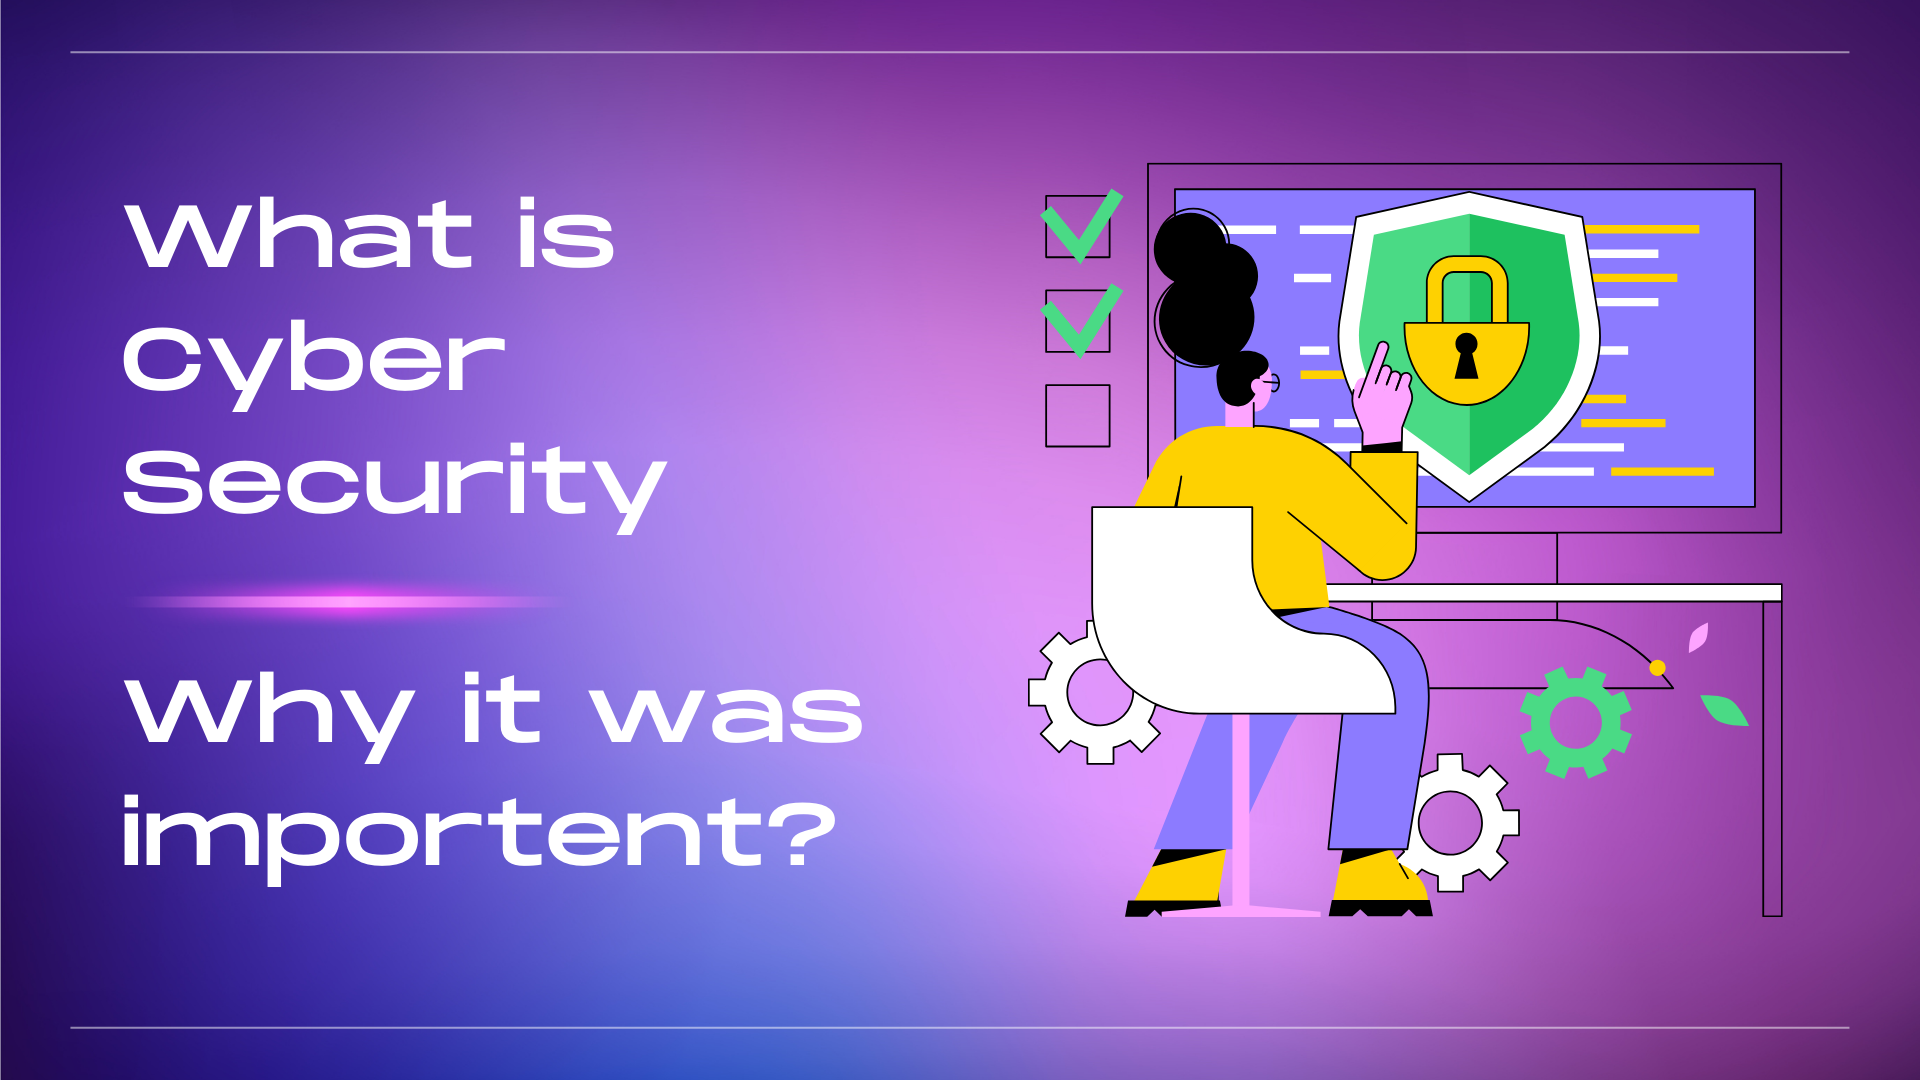 Cyber Security – Why Cyber Security is Important